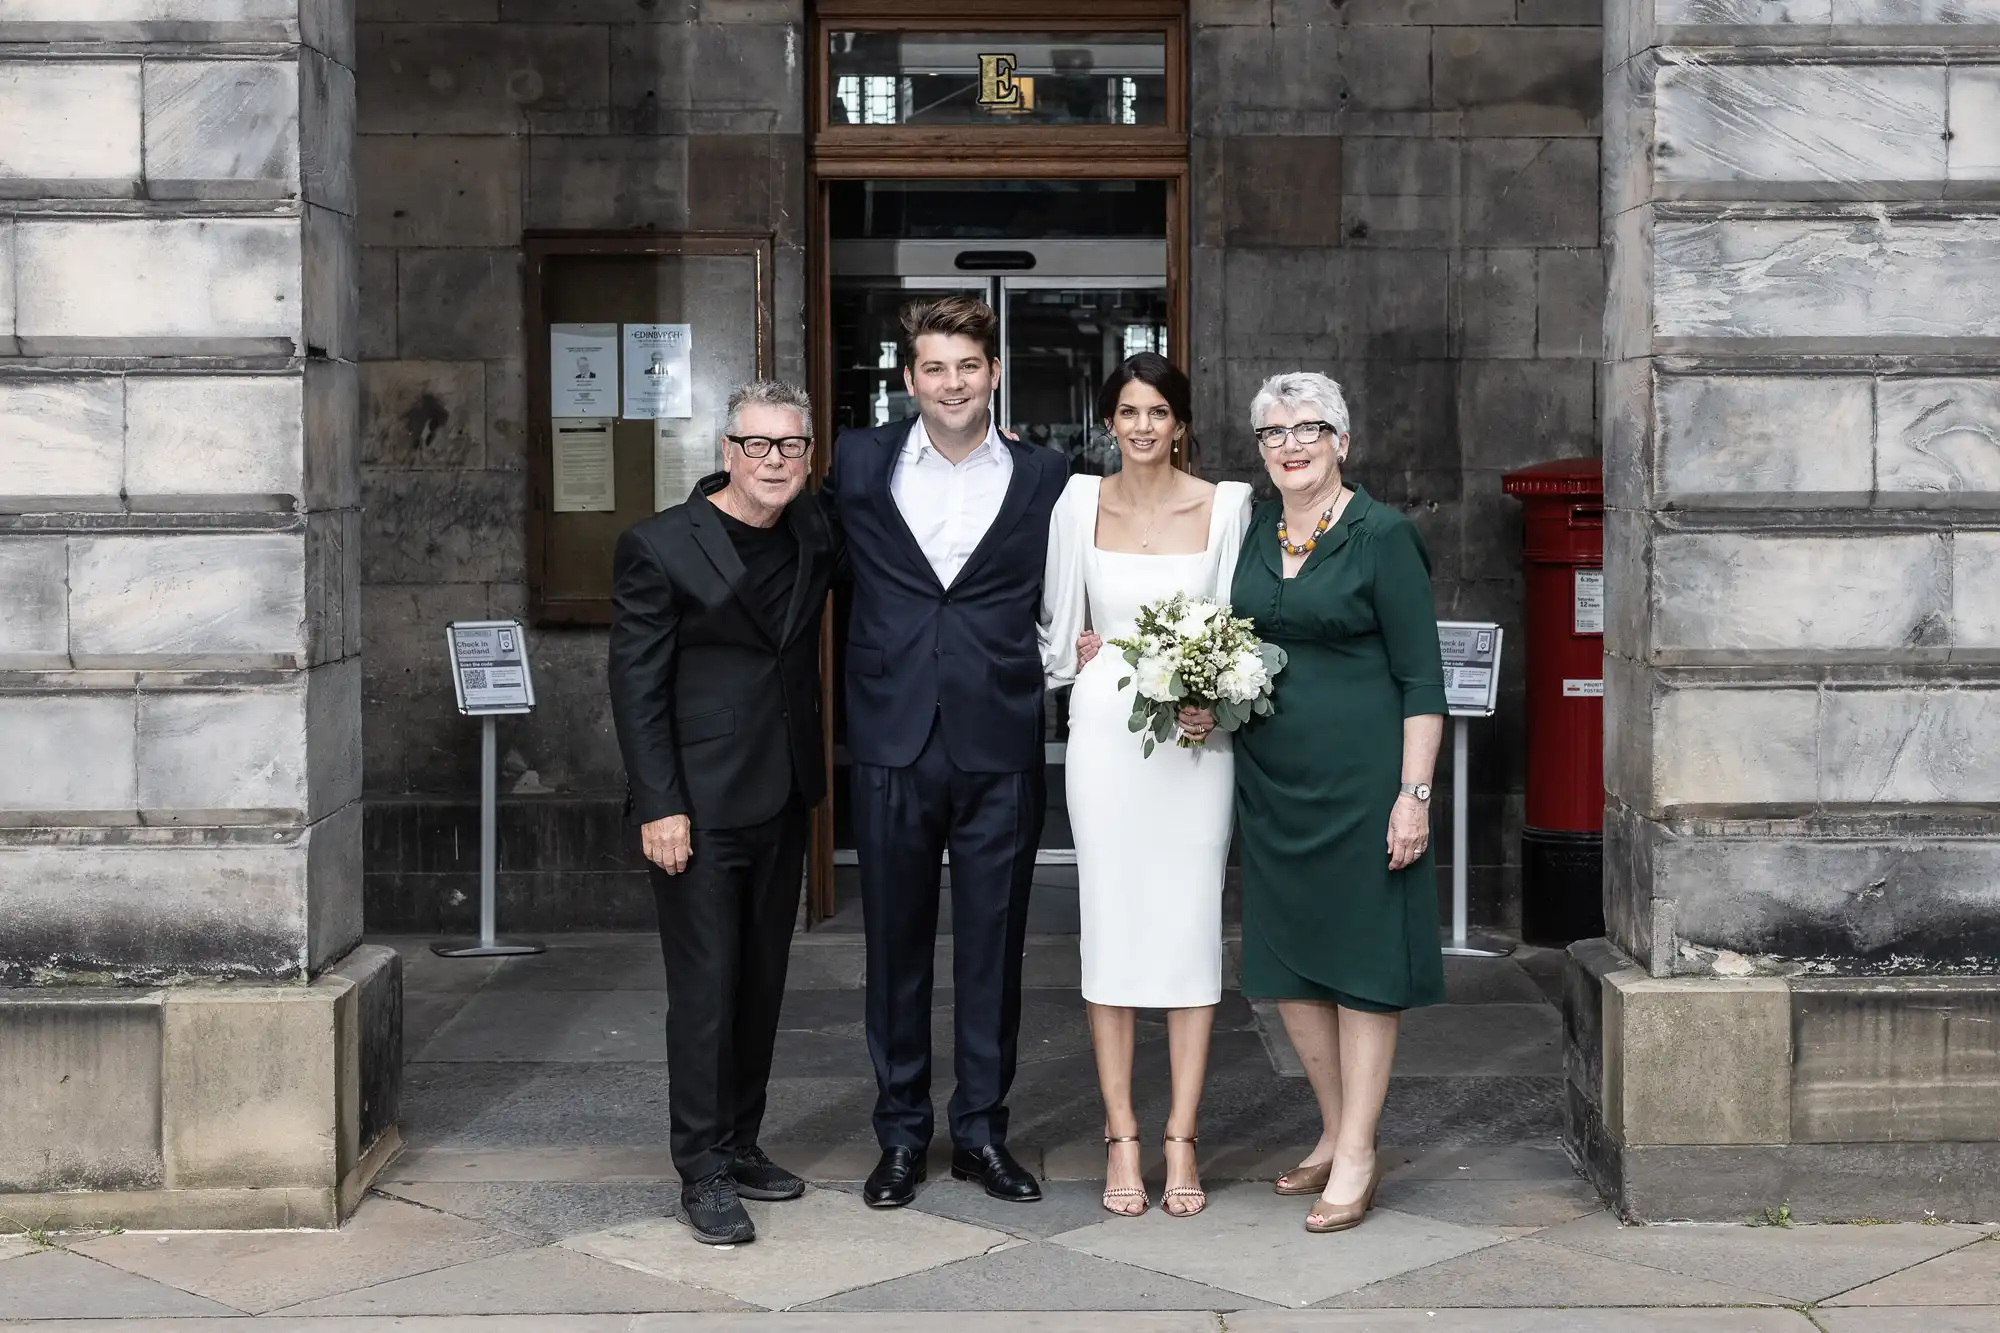 A newlywed couple poses with two older adults outside a stone building, smiling, the bride holding a bouquet.